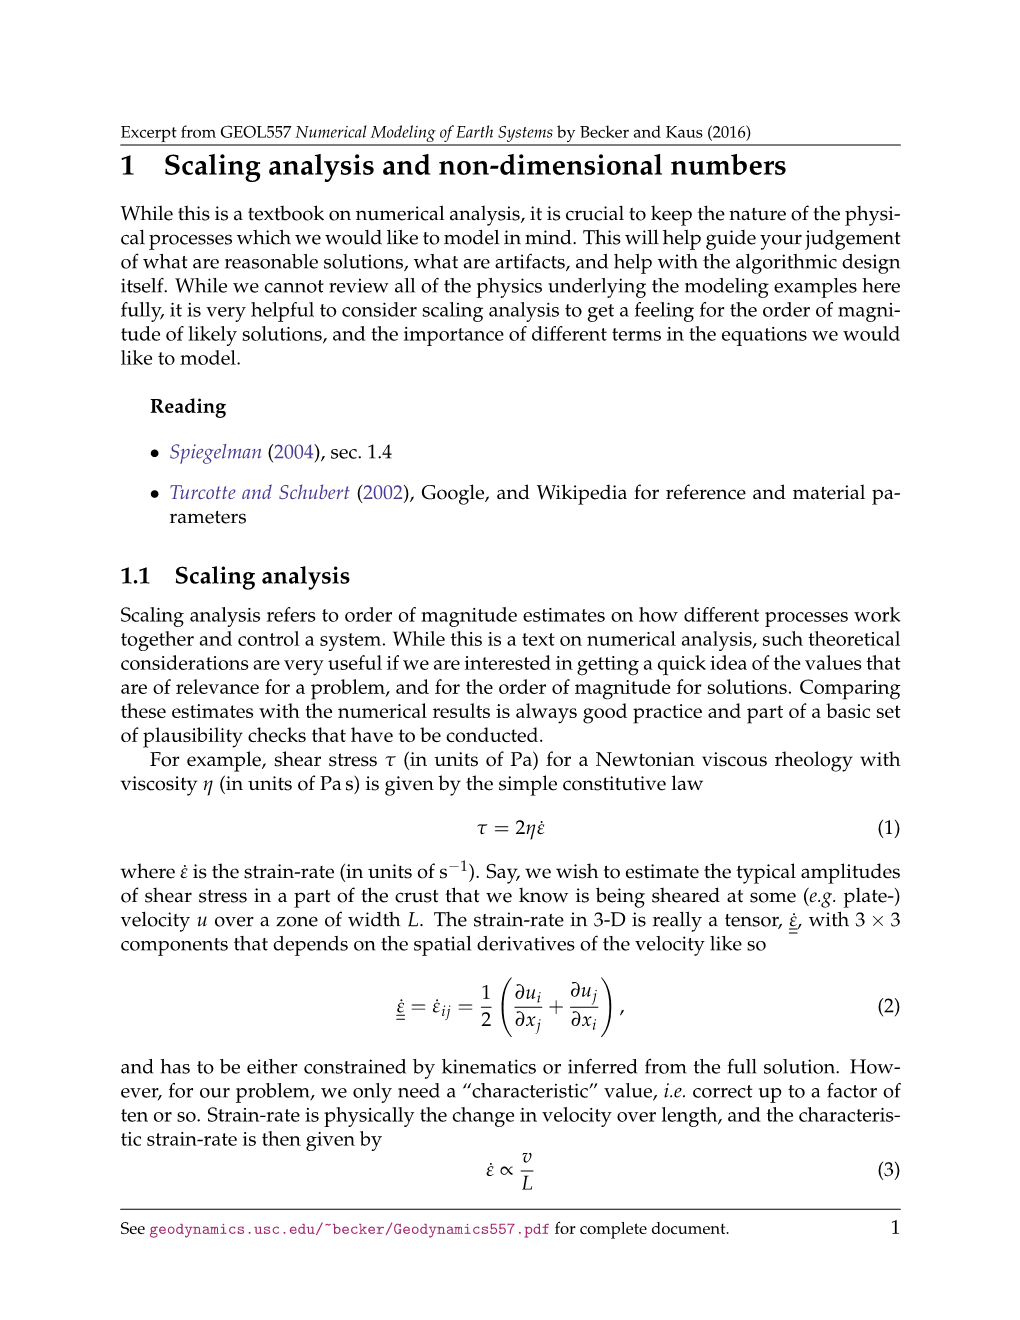 1 Scaling Analysis and Non-Dimensional Numbers